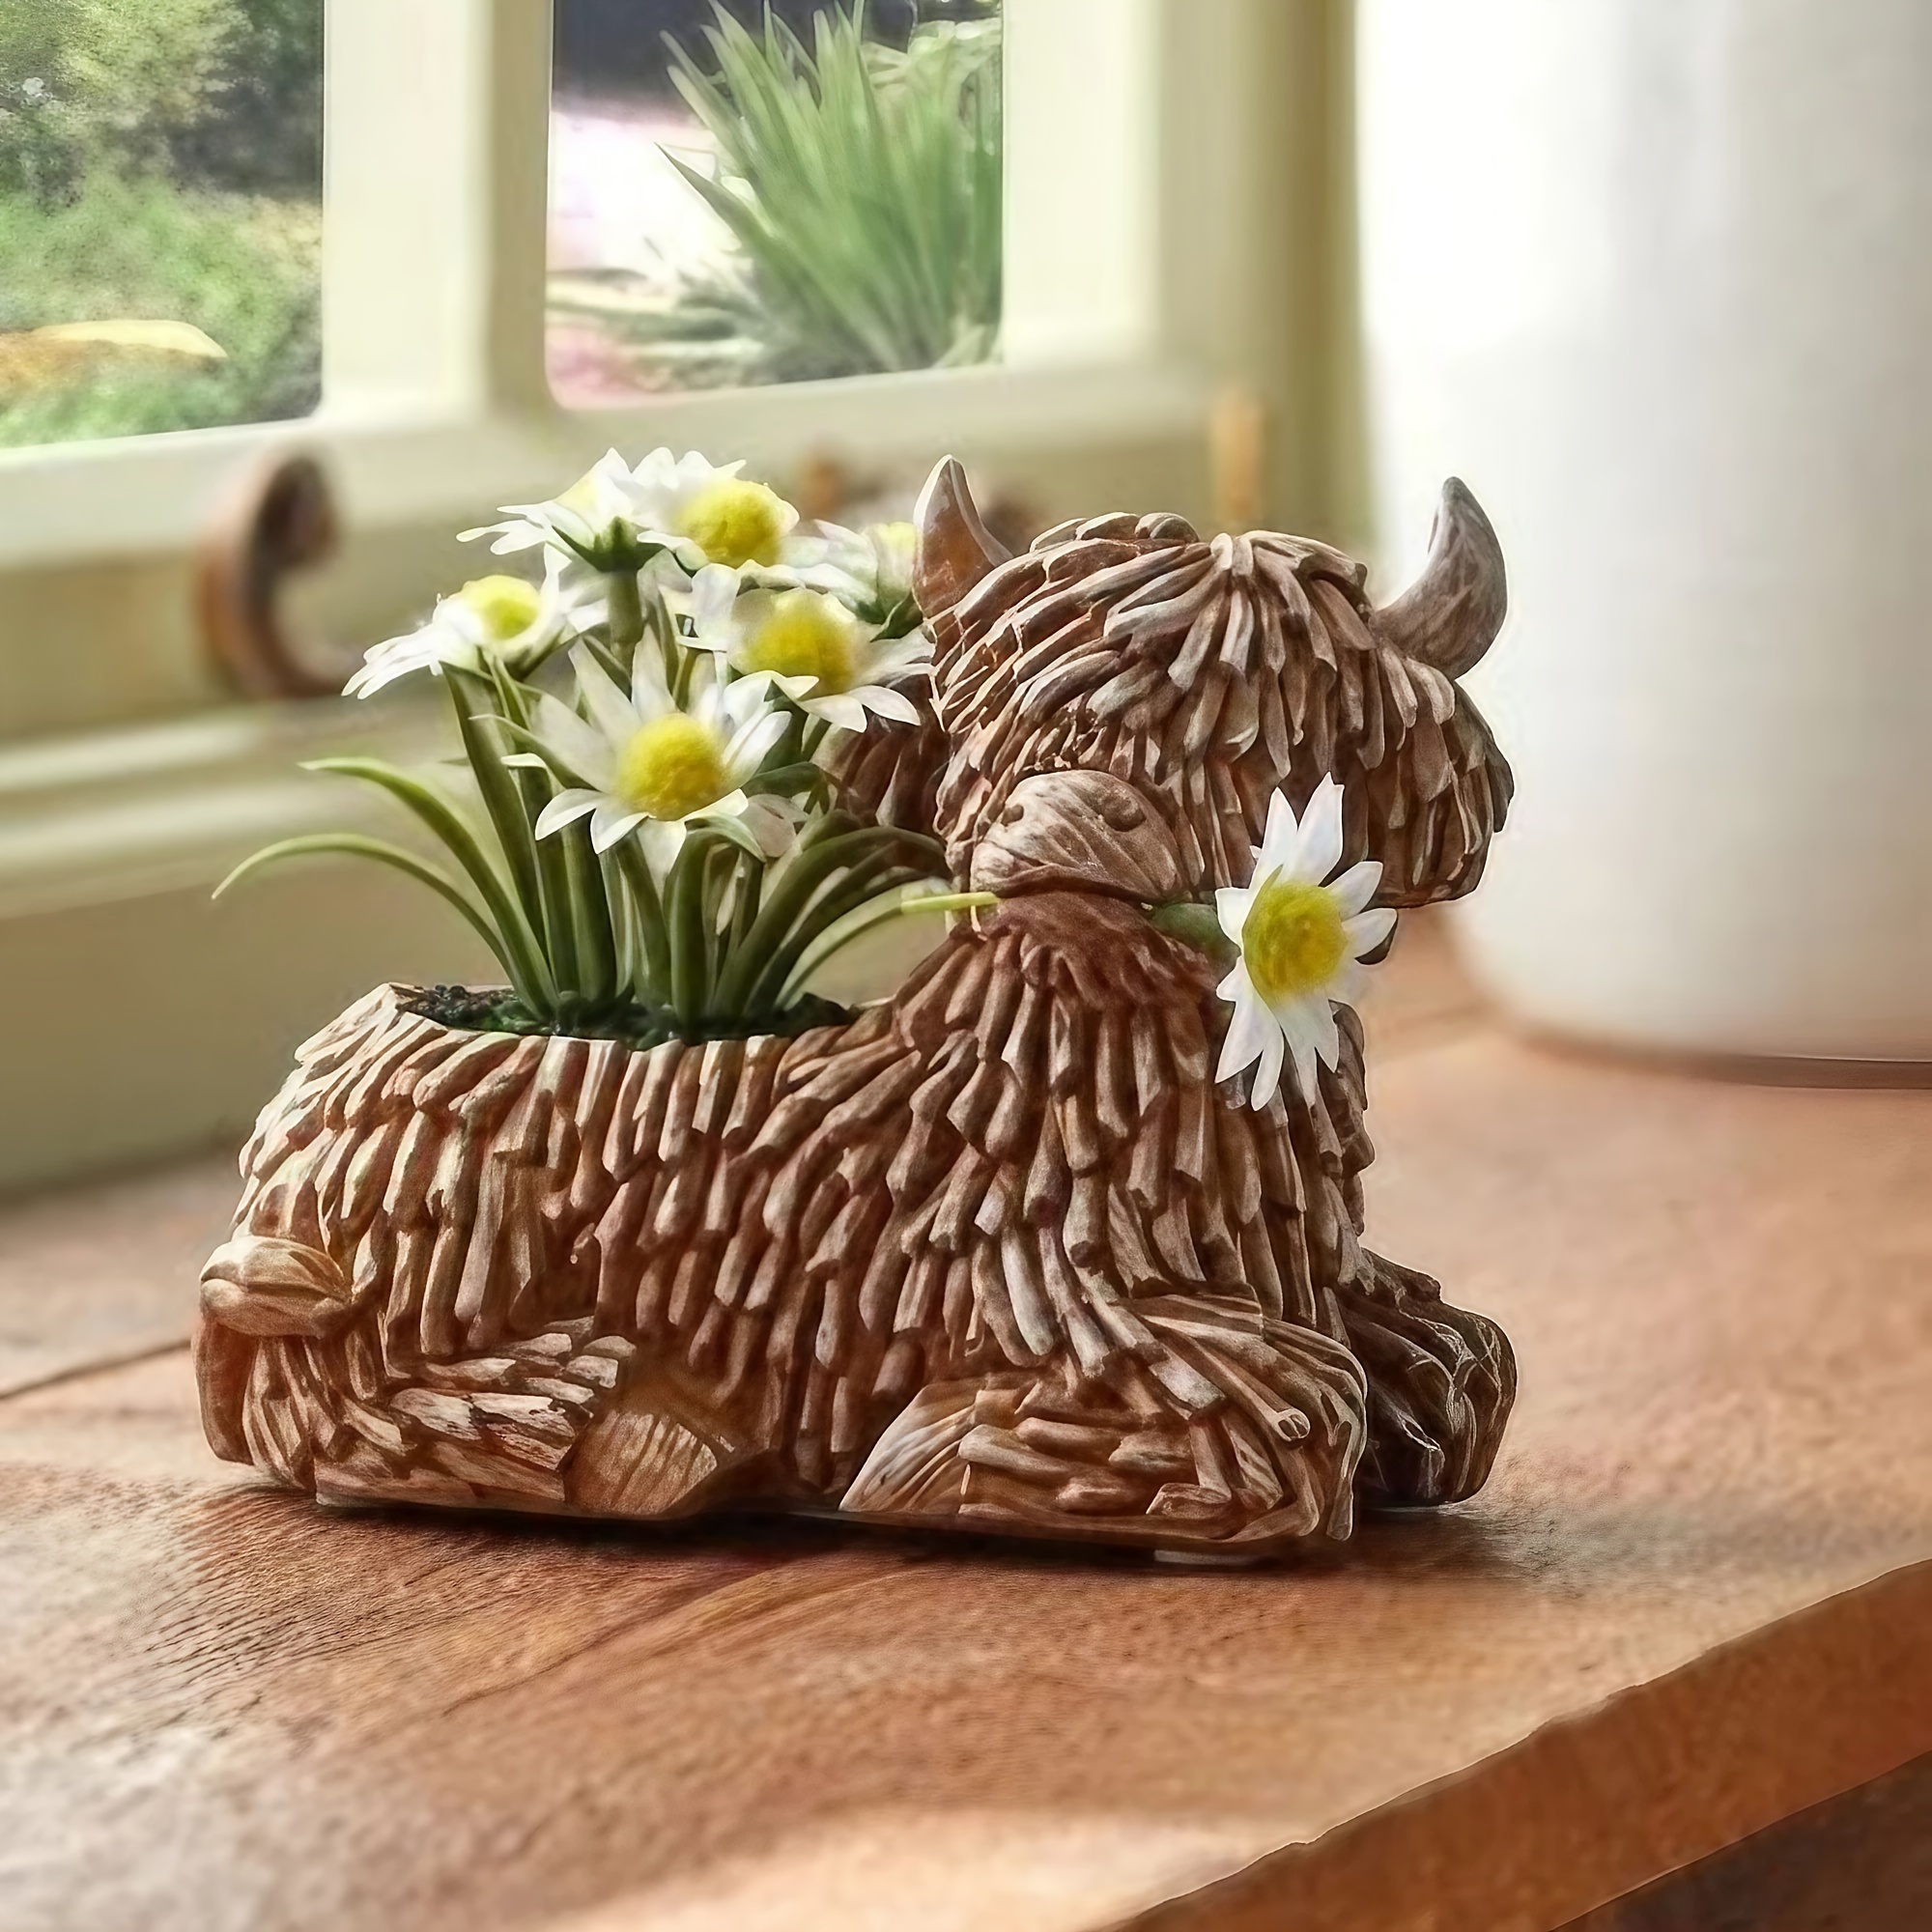 

Unique Highland Yak Resin Planter - Versatile Indoor/outdoor Succulent Pot For Home & Office Decor, Perfect Holiday Gift